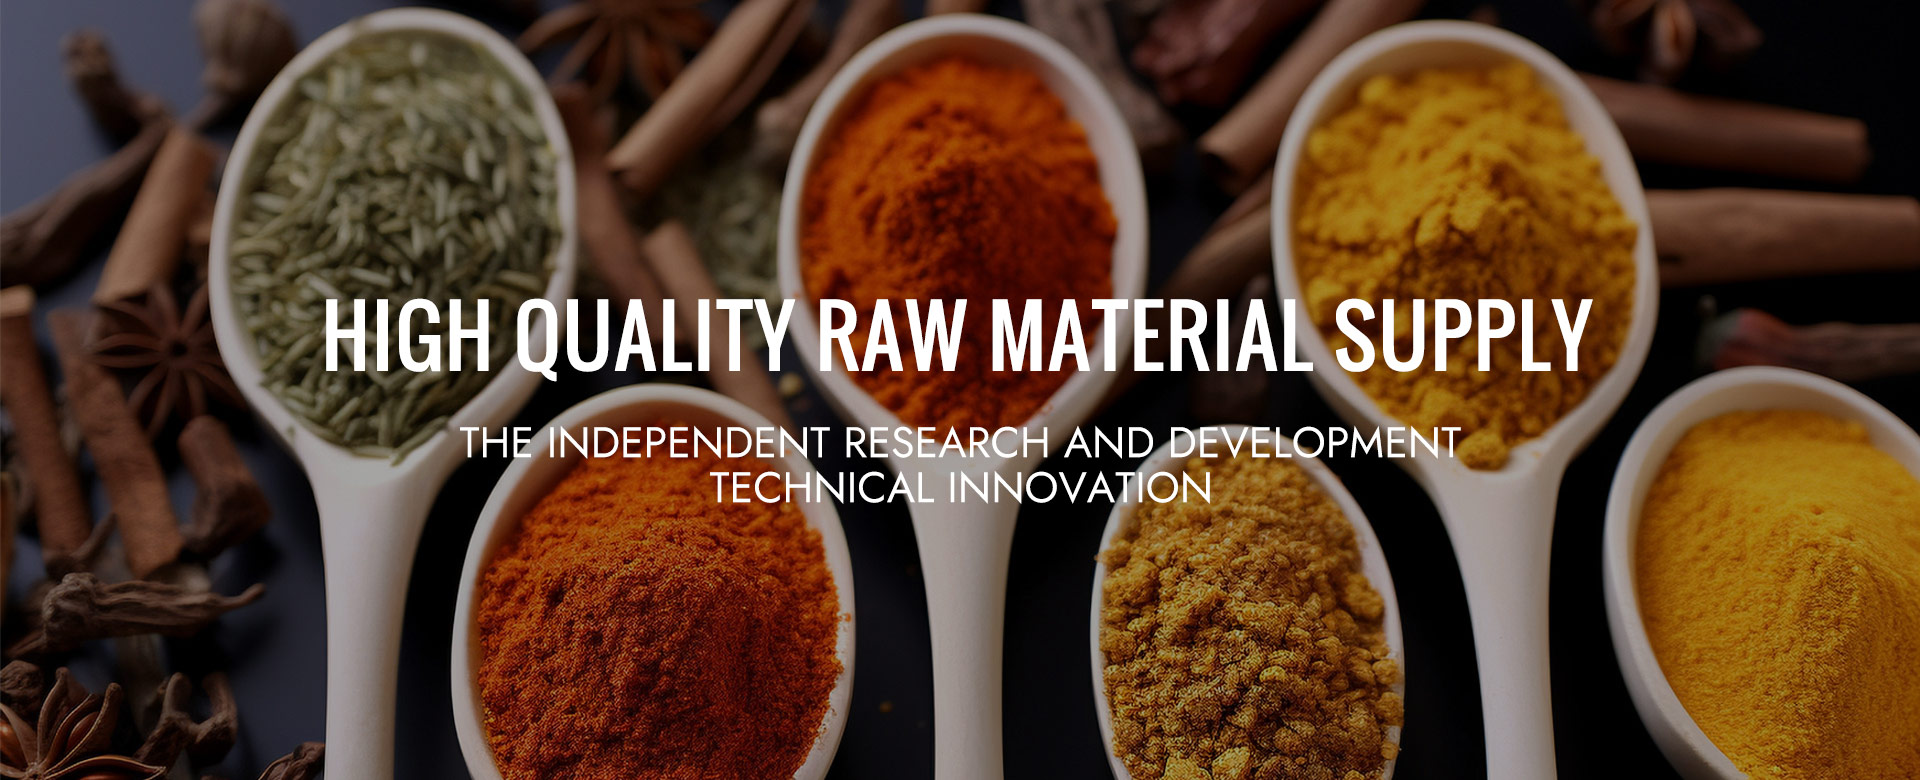 High Quality Raw Material Supply